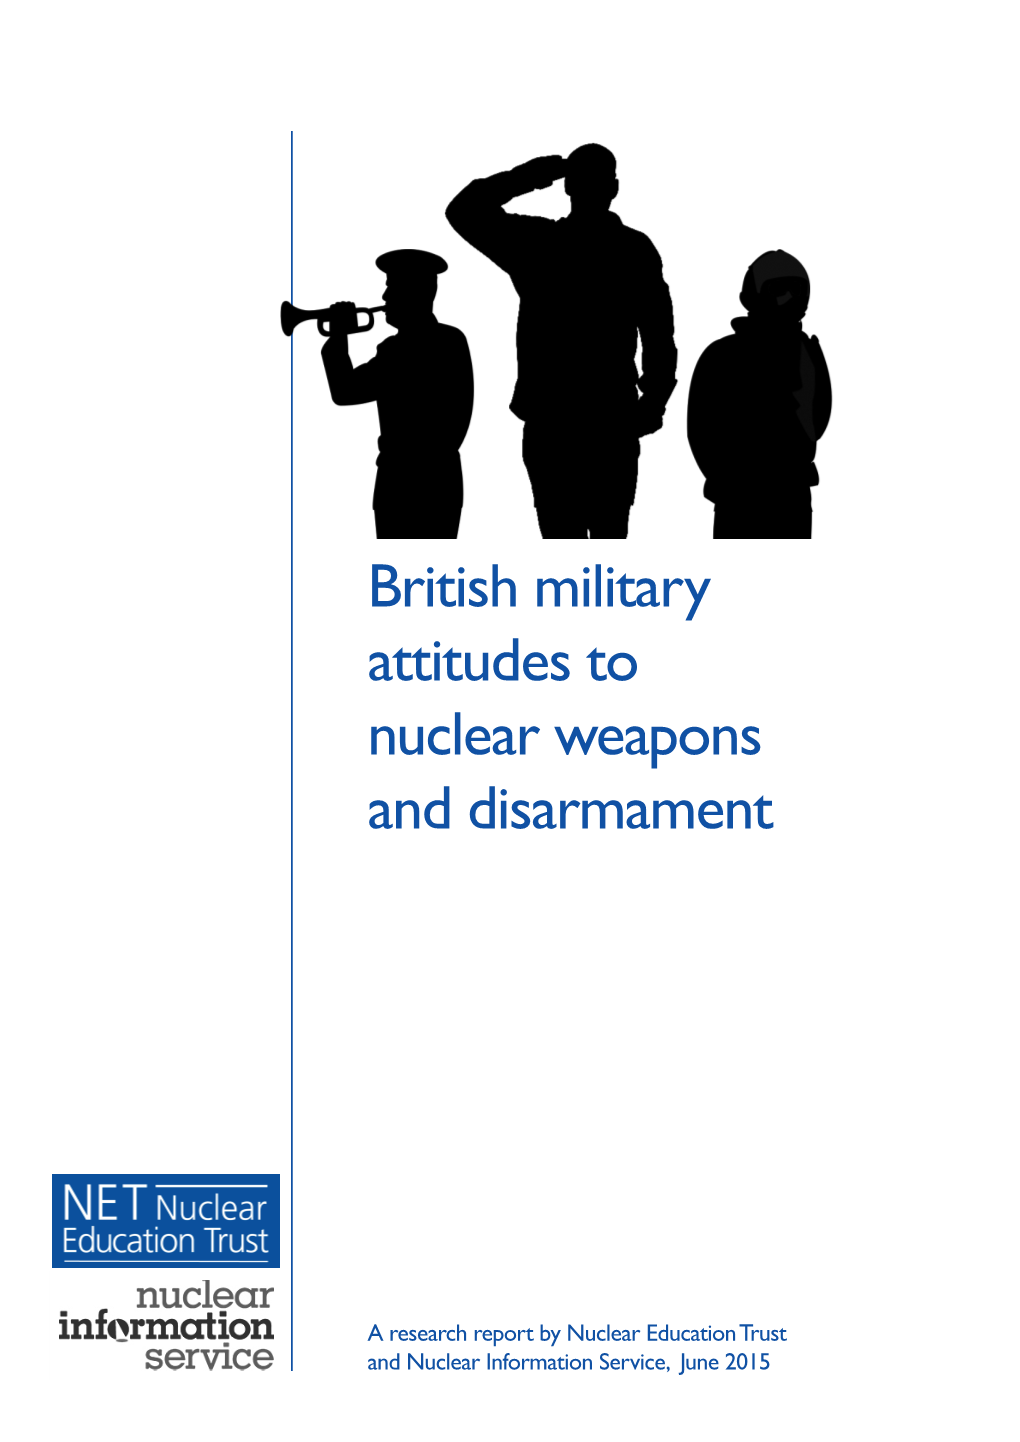 British Military Attitudes to Nuclear Weapons and Disarmament